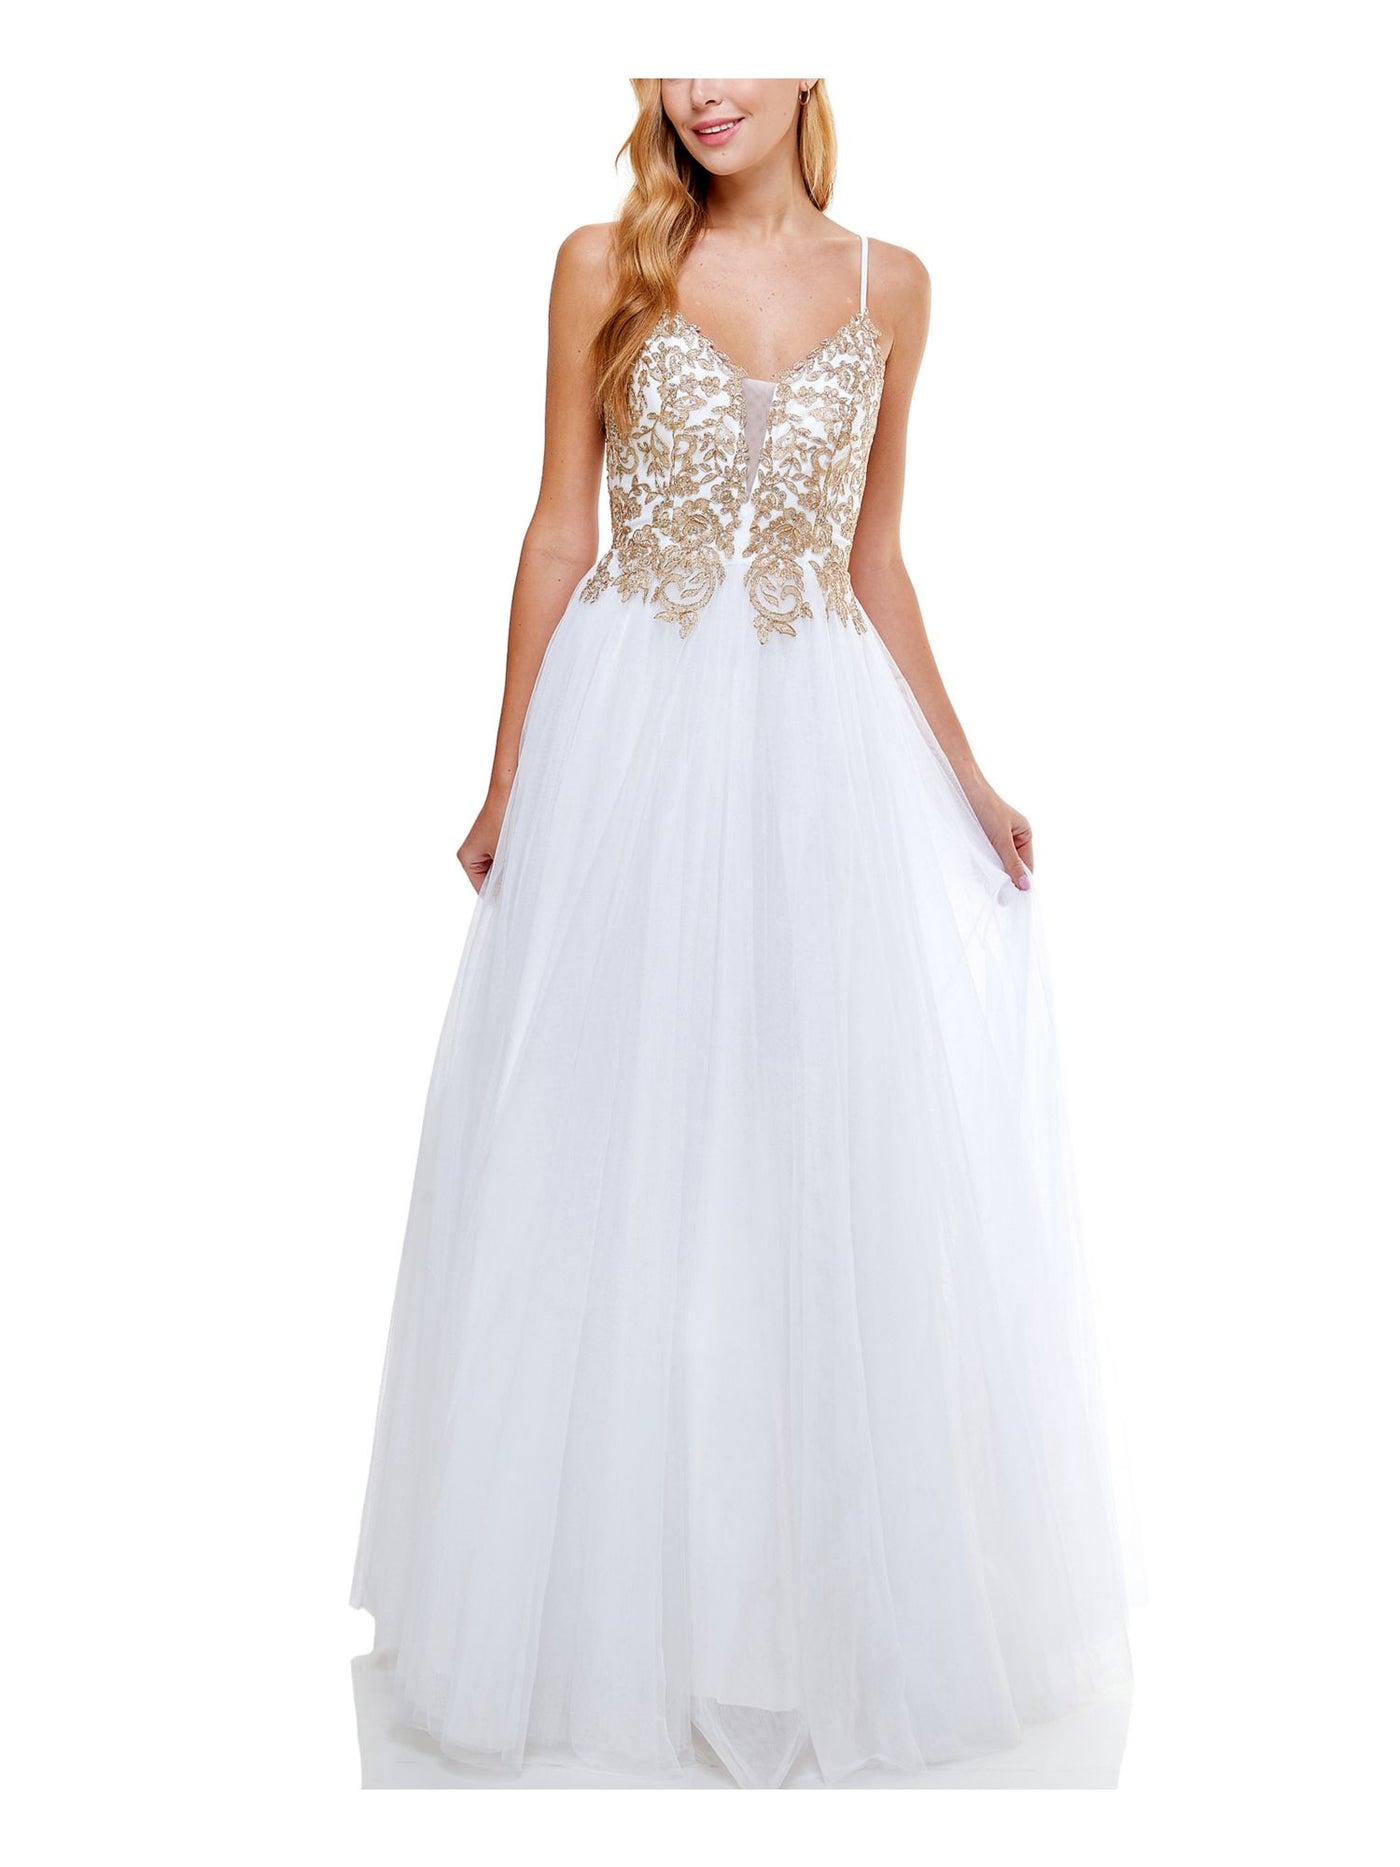 SAY YES TO THE DRESS Womens White Embellished Spaghetti Strap Sweetheart Neckline Full-Length Prom Fit + Flare Dress 7